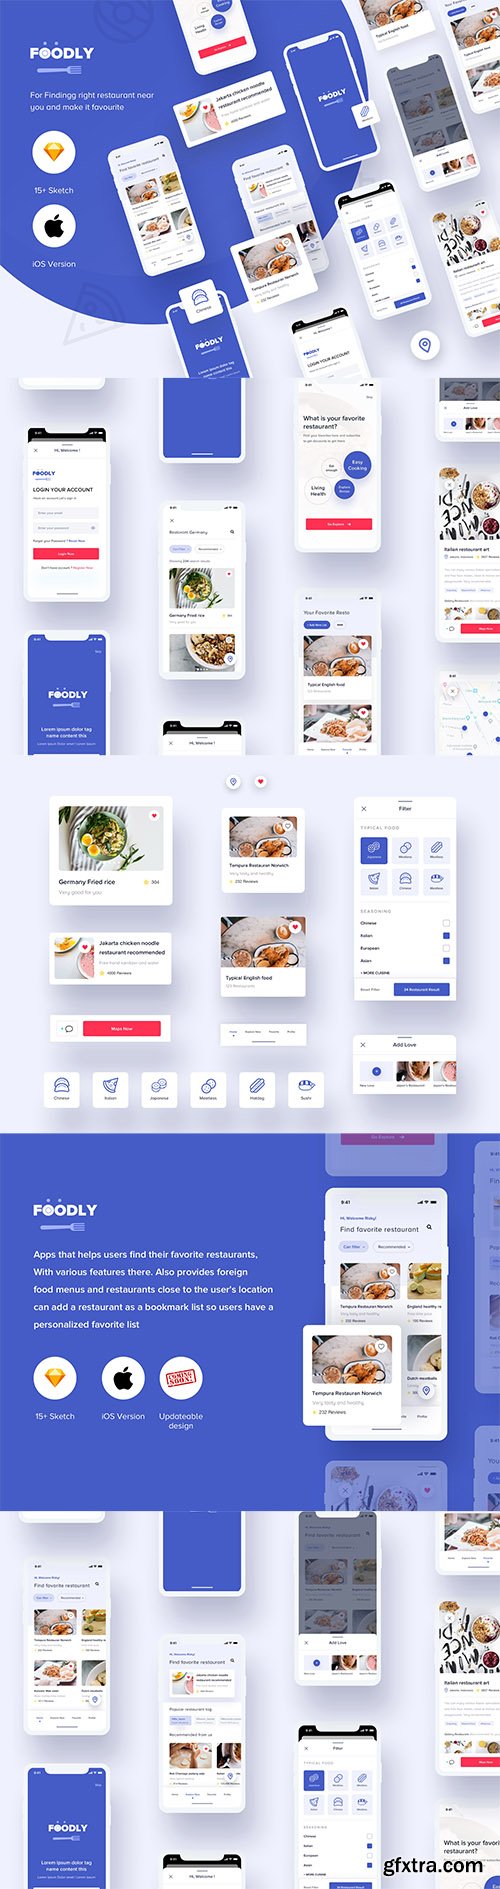 Foodly iOS Apps - UI Kit